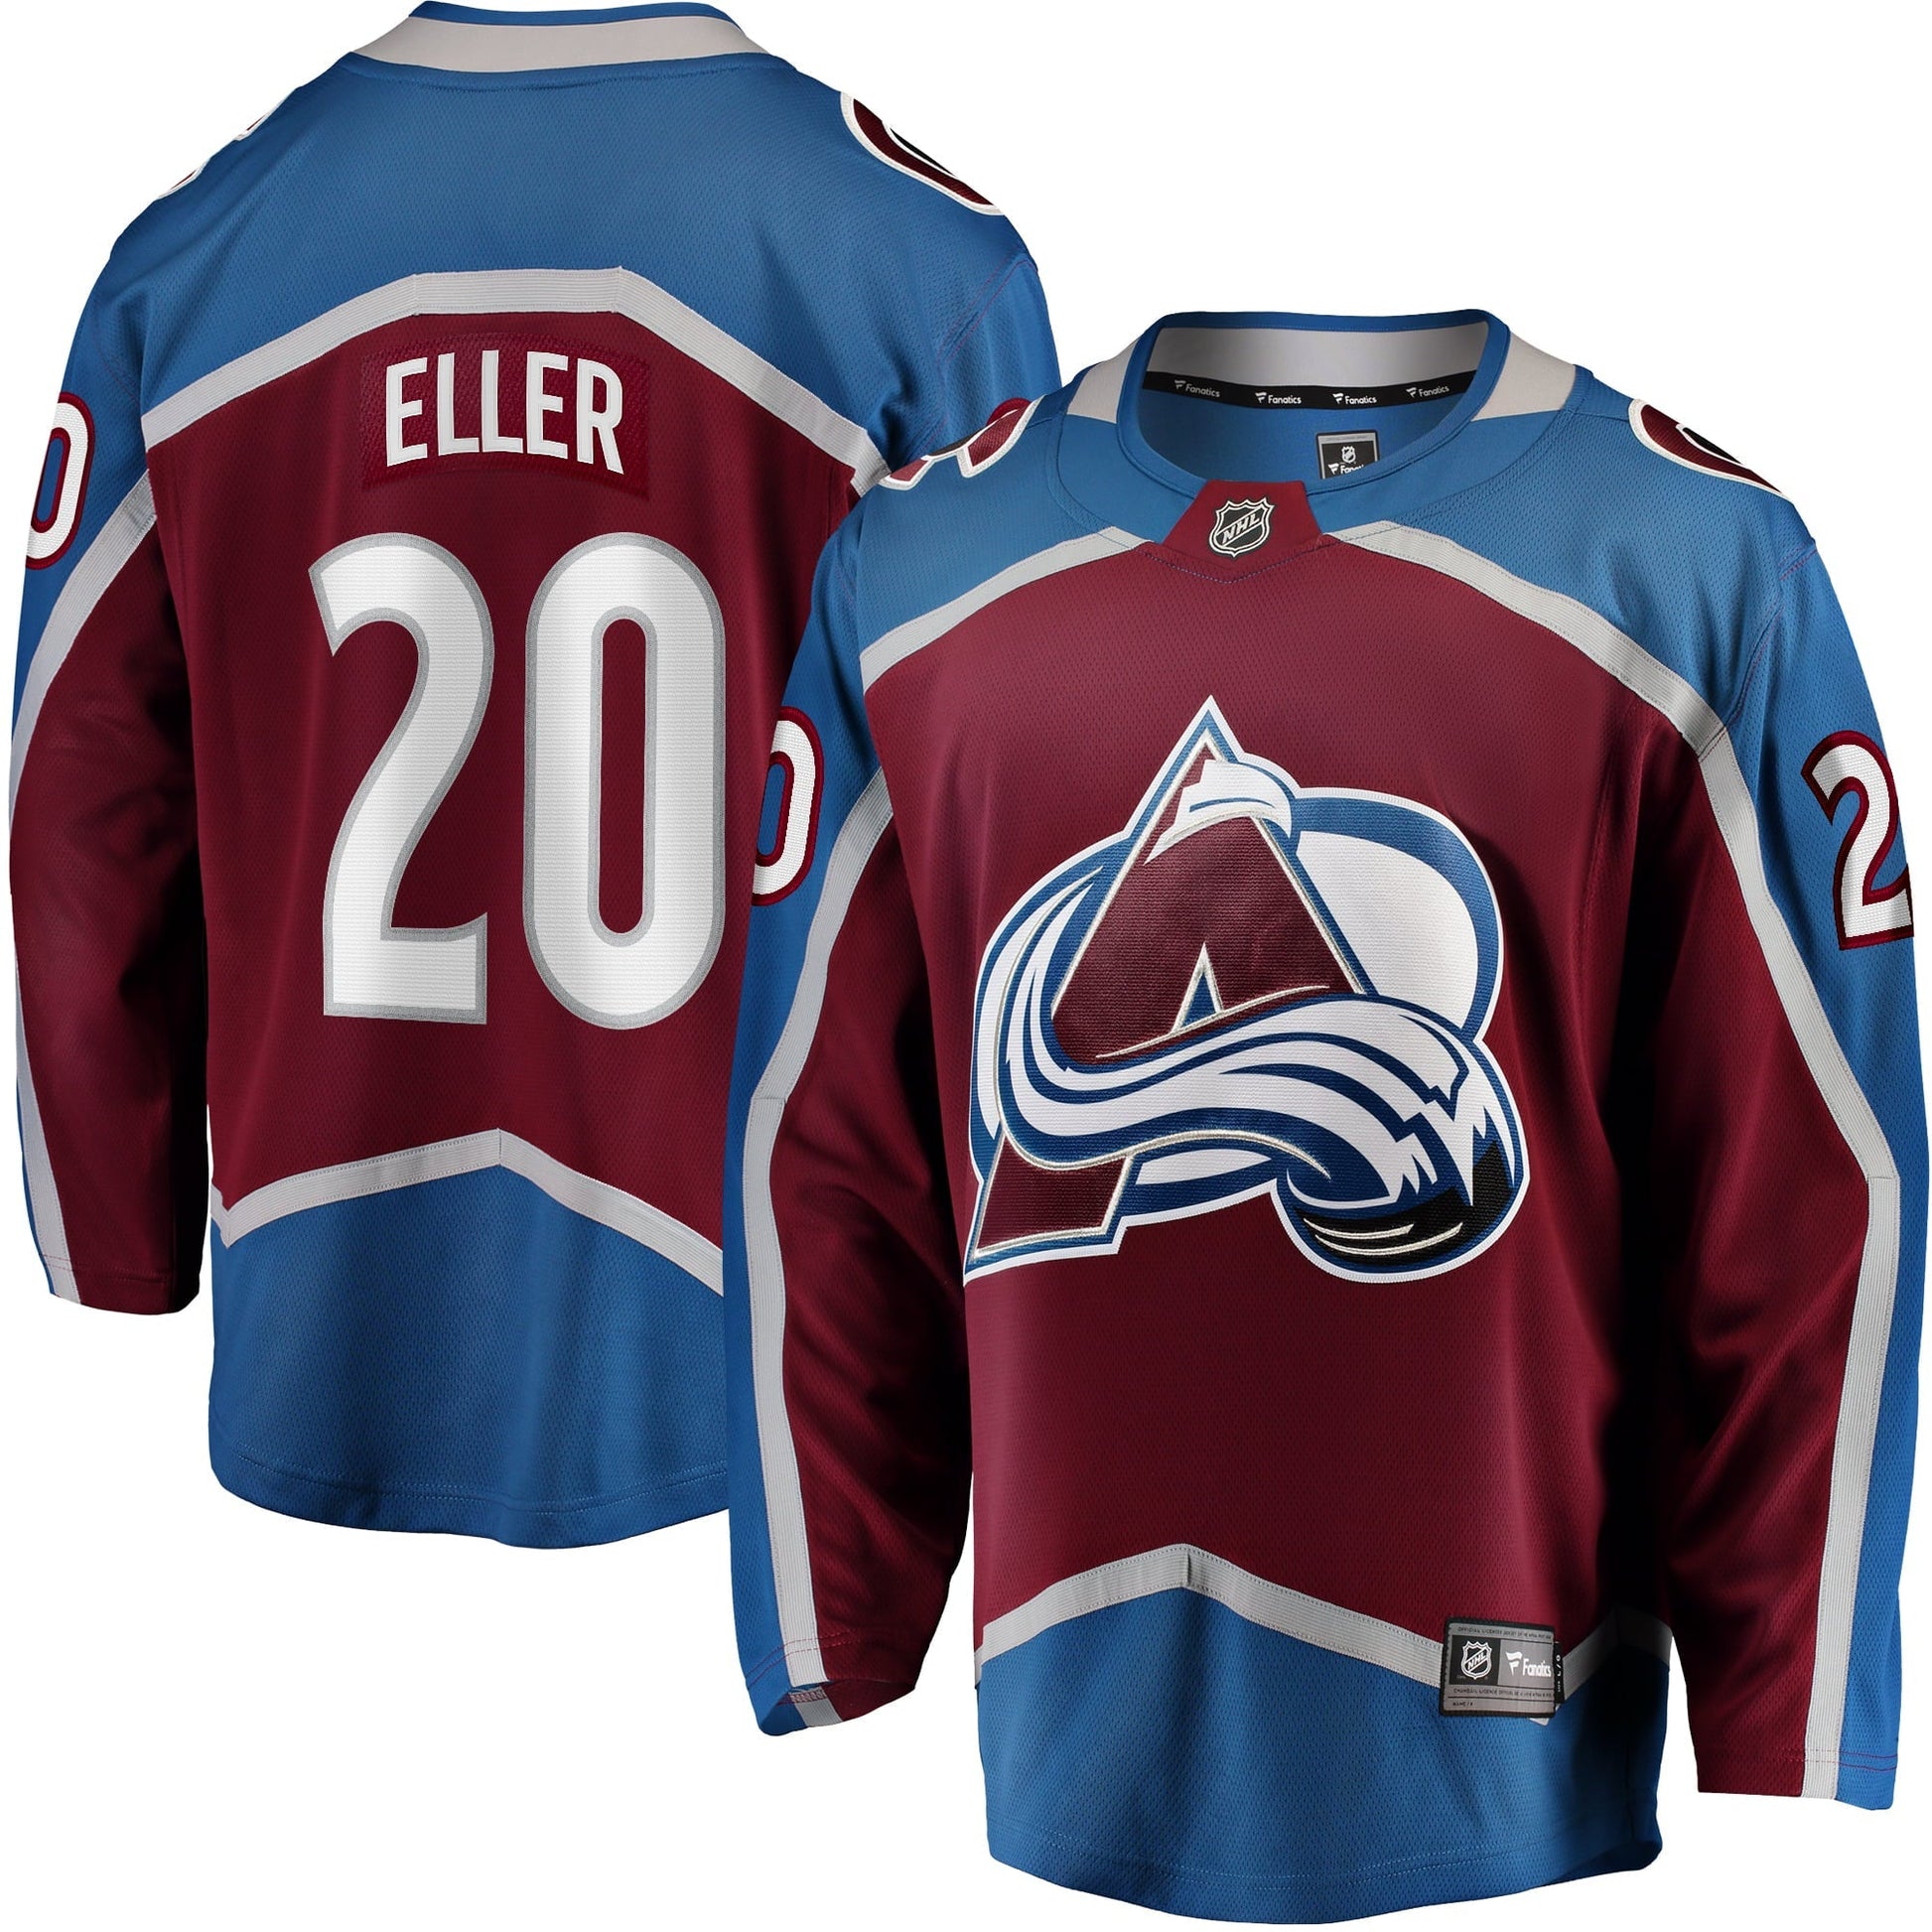 Colorado Avalanche Should Wear White At Home